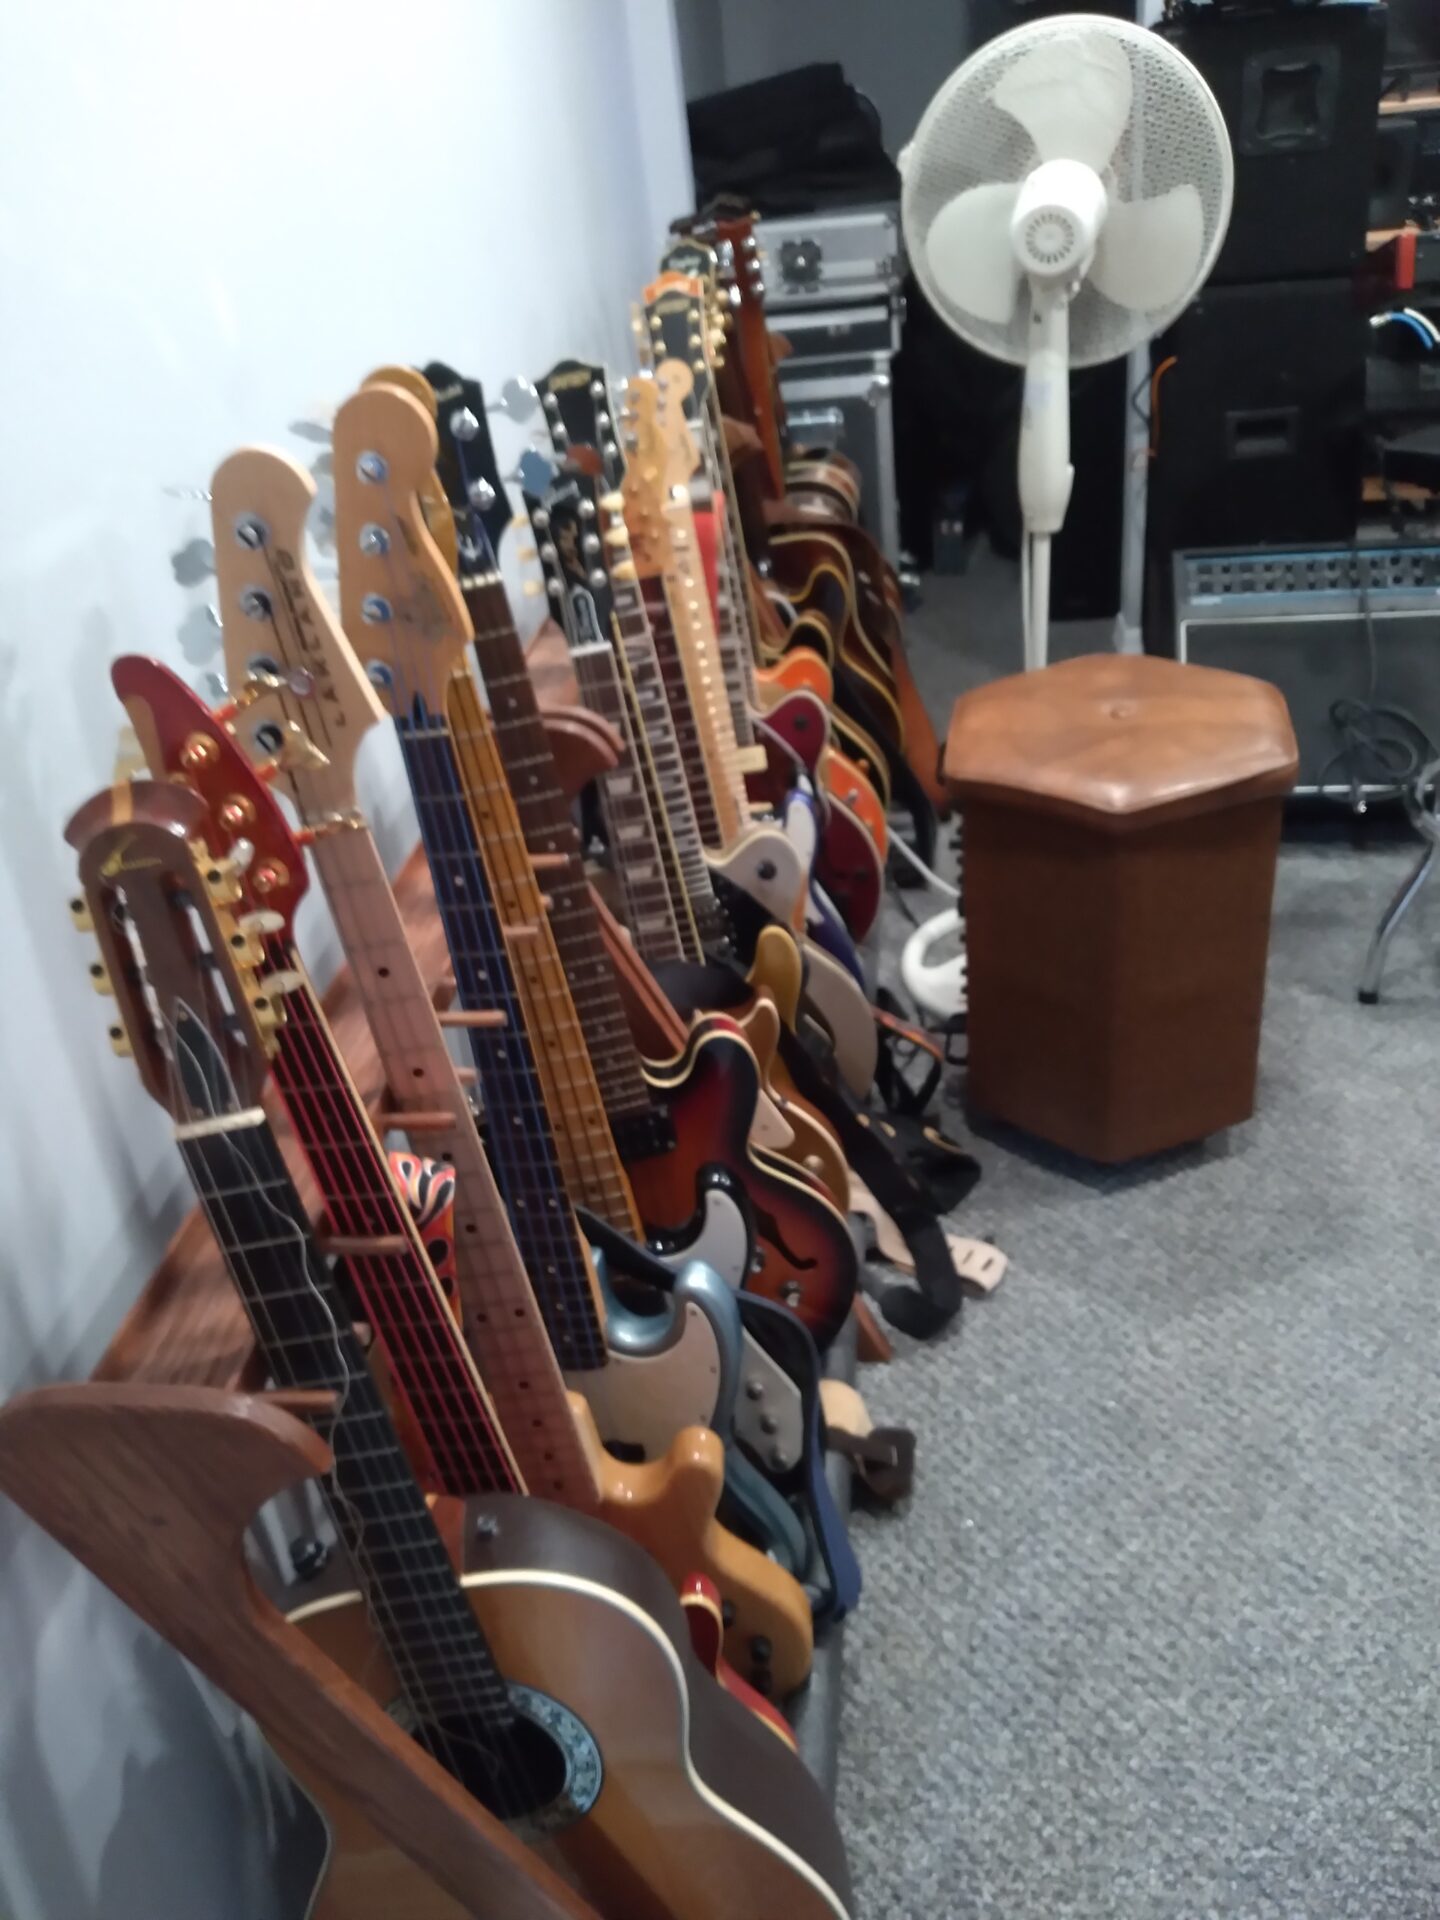 Assembly of Guitars and A Fan